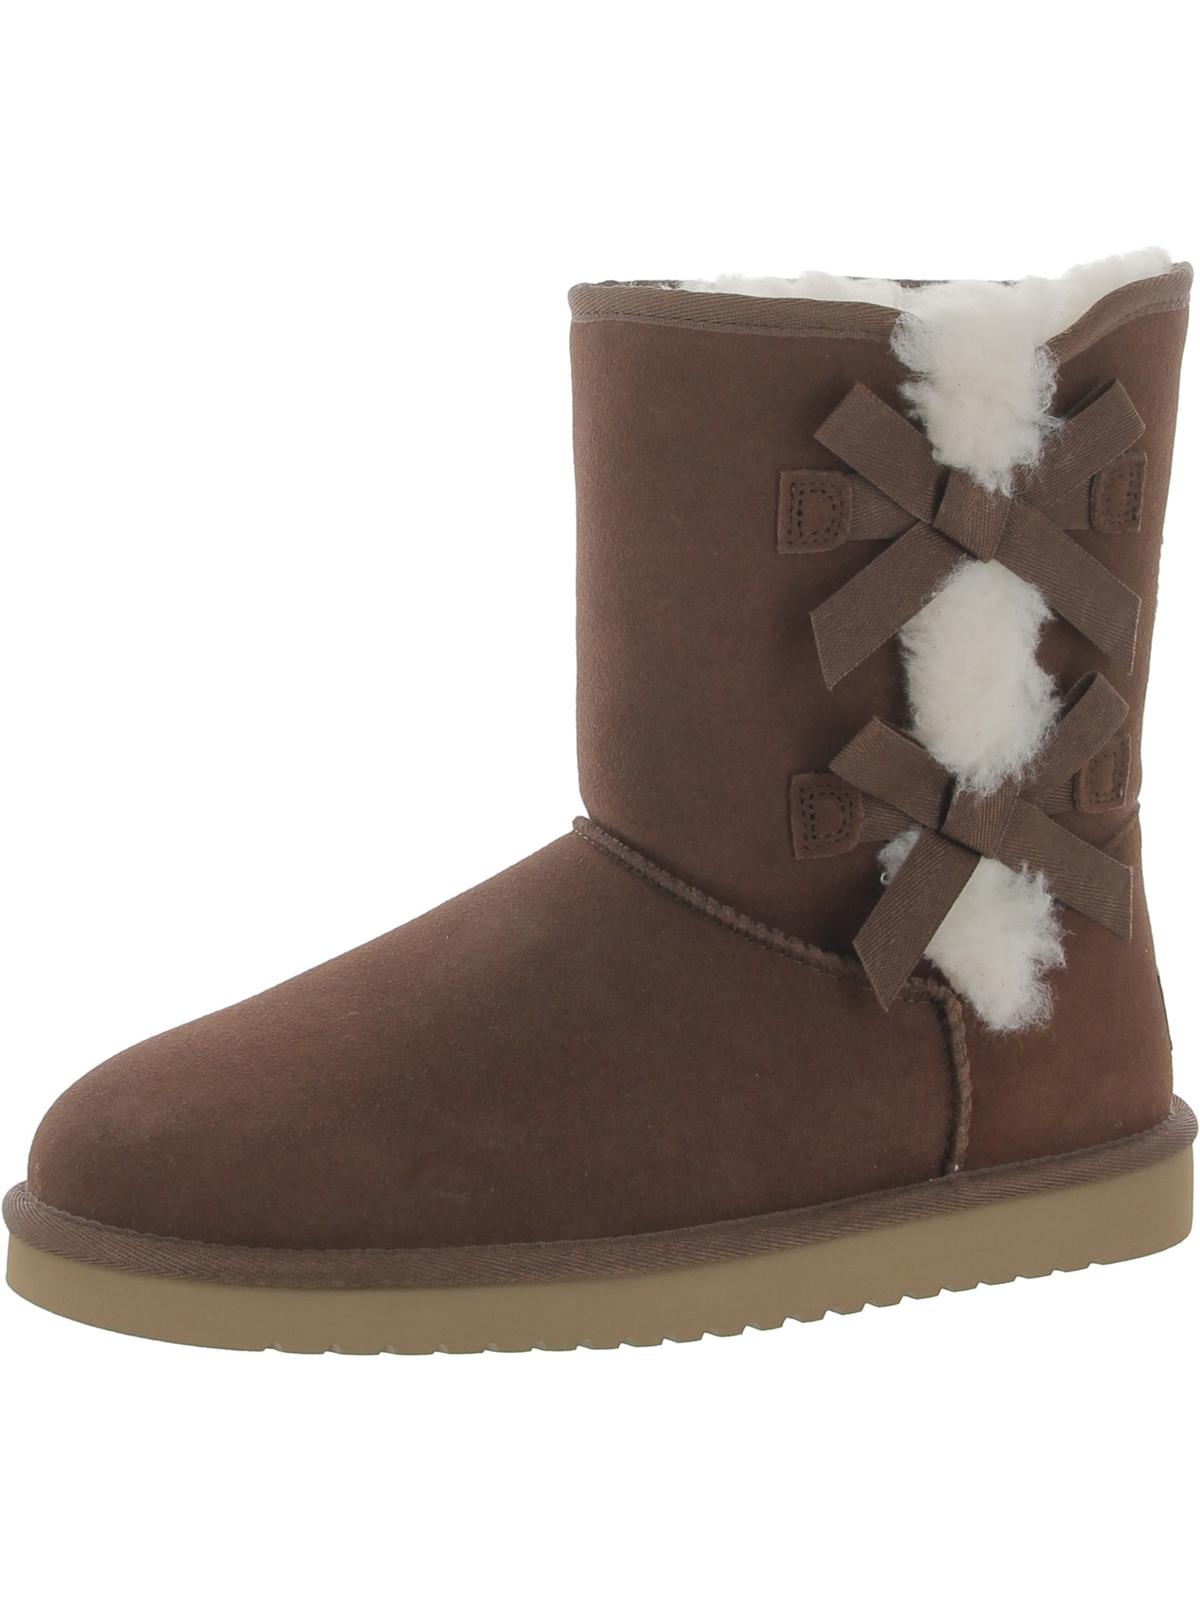 Shop Koolaburra Victoria Short Womens Leather Embellished Shearling Boots In Brown